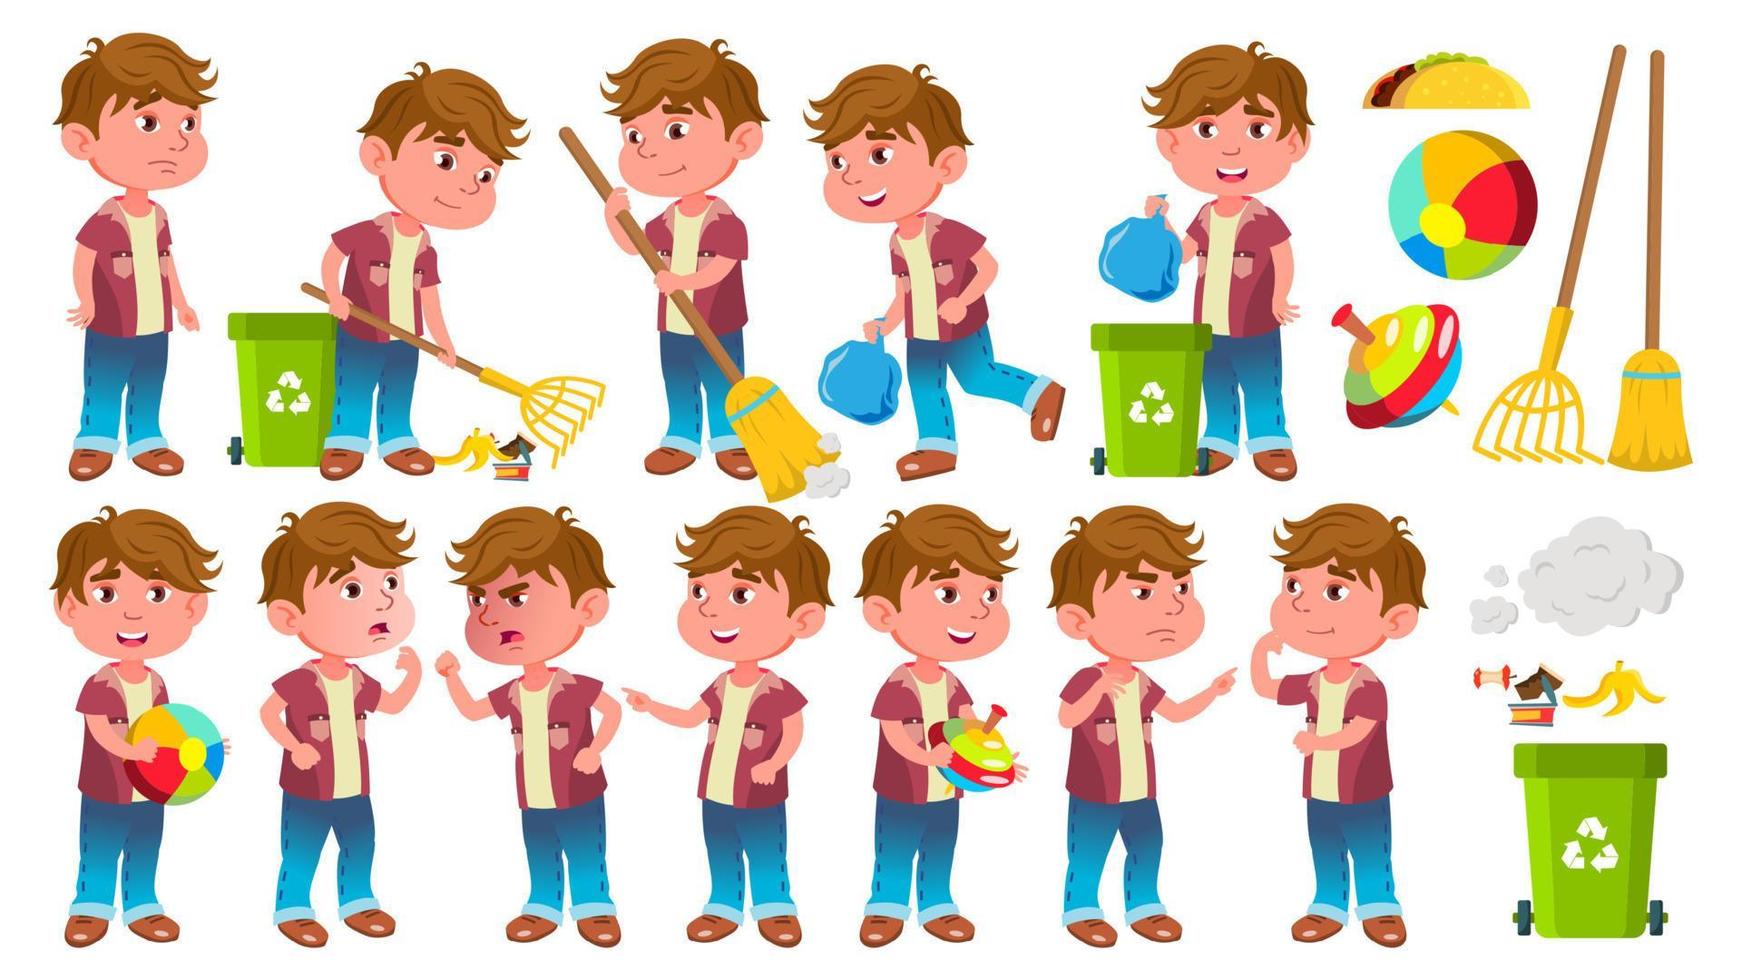 Boy Kindergarten Kid Poses Set Vector. Little Child. Helping On The Garden. Cleaning. Lifestyle. For Advertising, Placard, Print Design. Isolated Cartoon Illustration vector